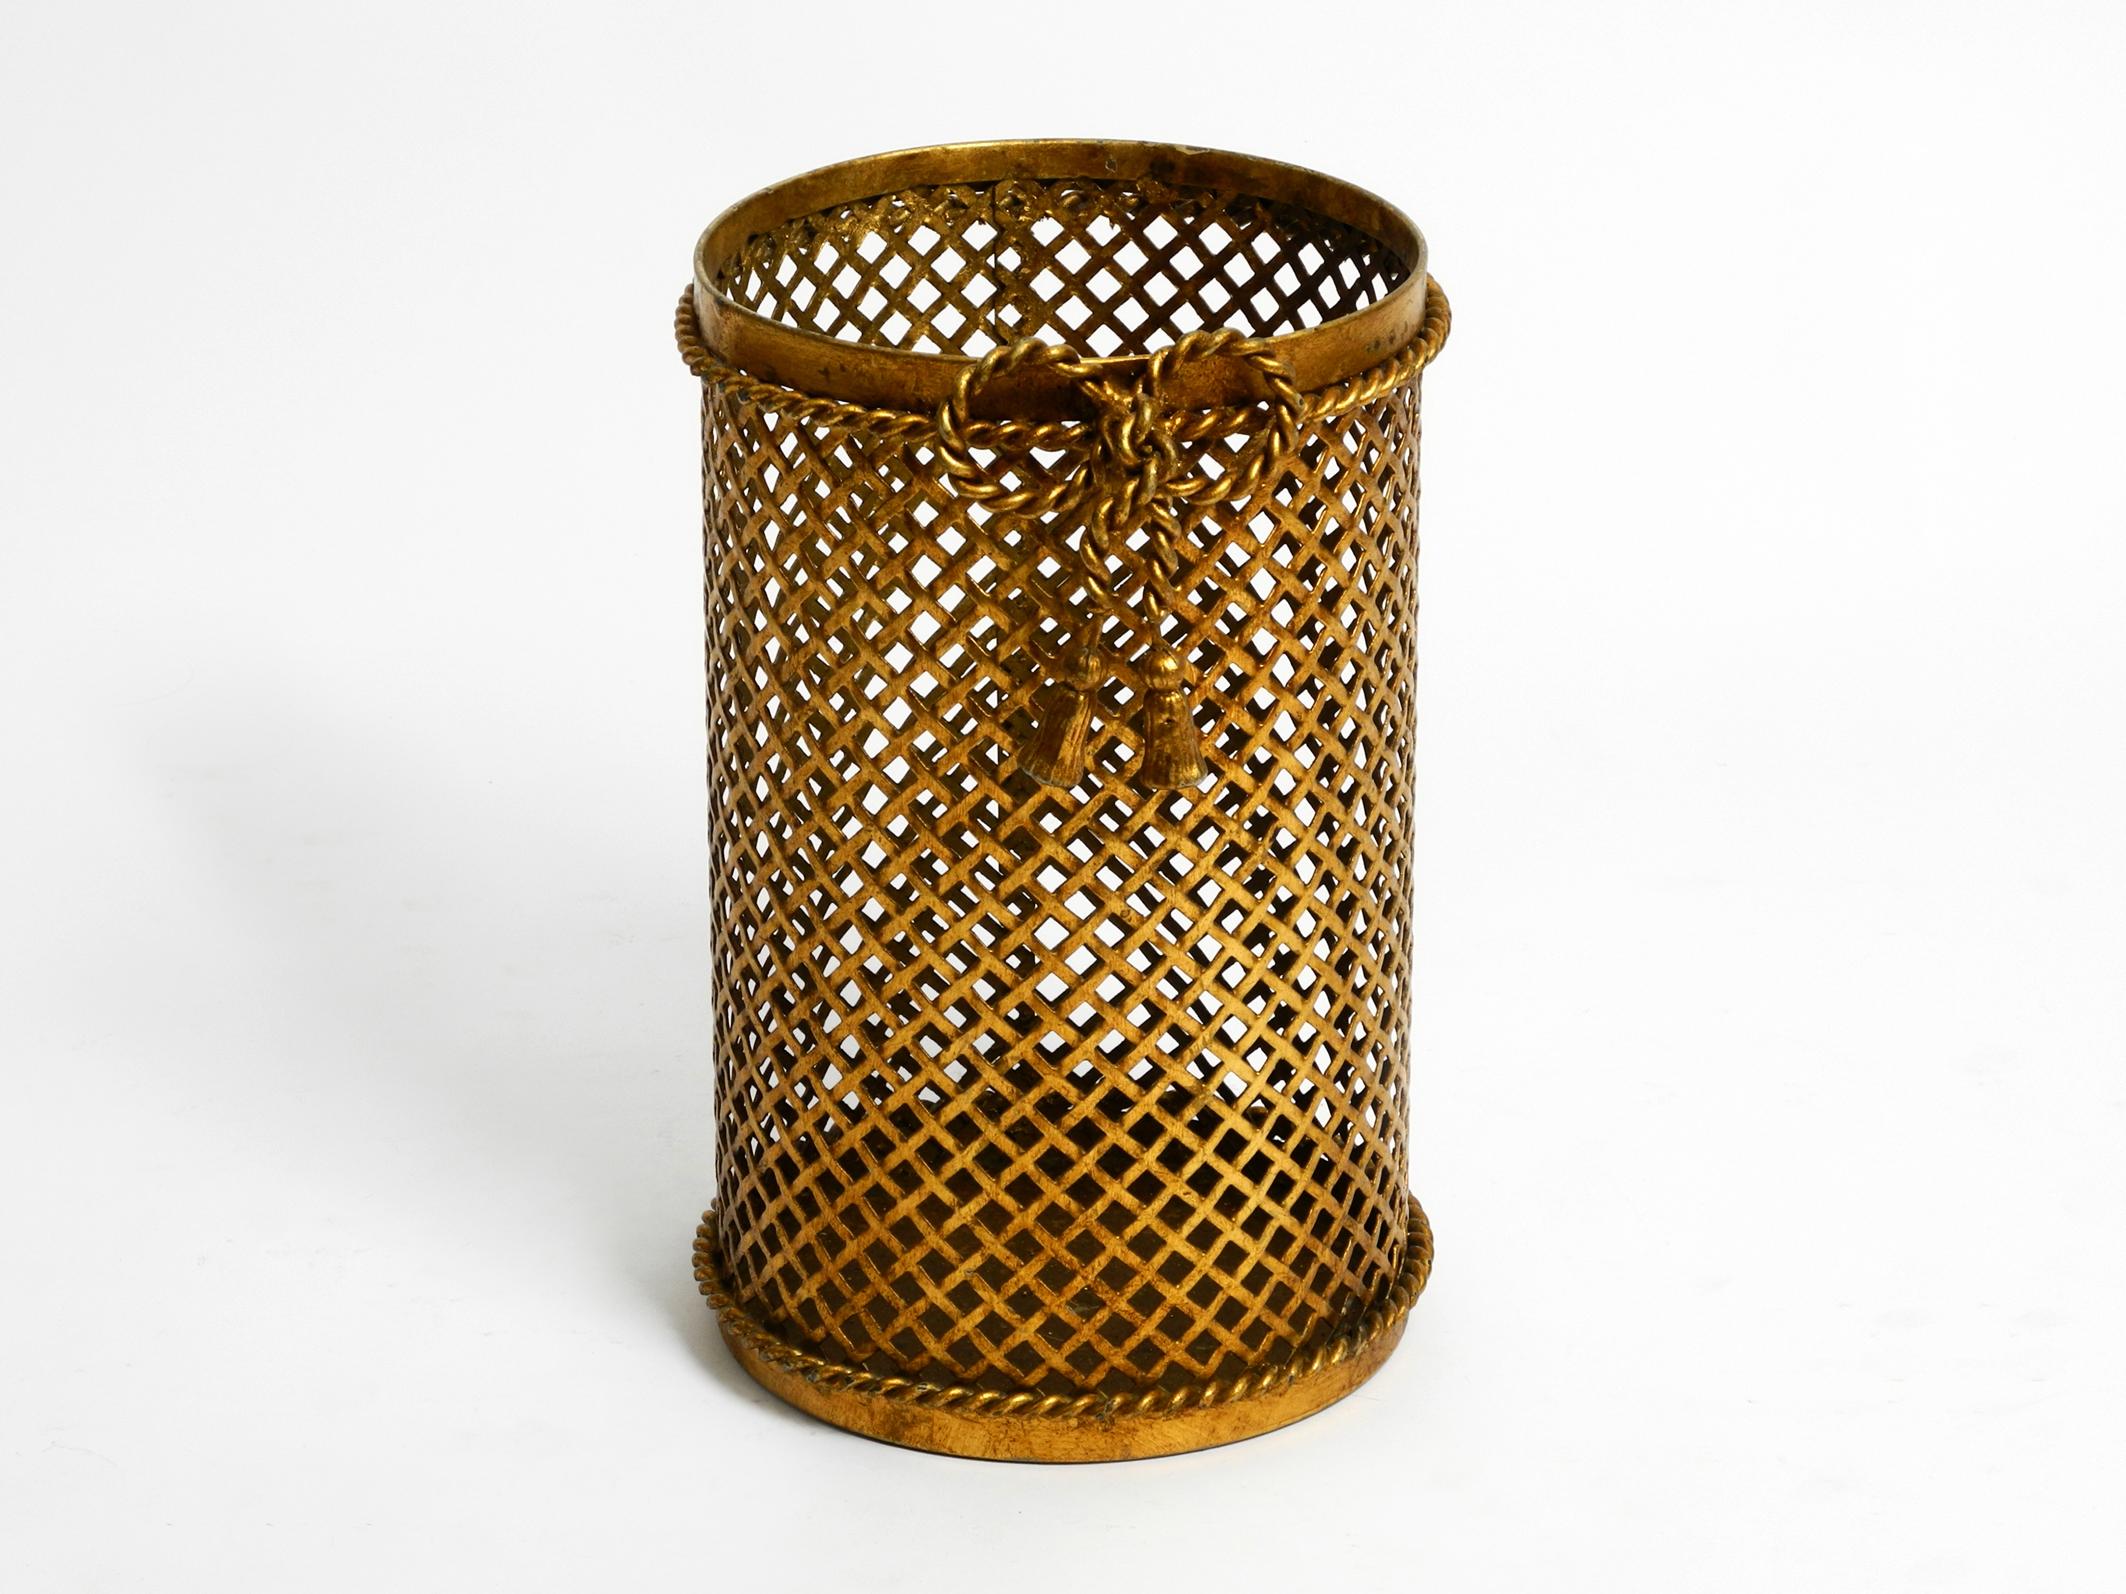 Very elegant Mid Century Regency paper basket made of gold plated metal.
Manufacturer is Li Puma. Made in Italy.
Made from perforated metal and gold plated. Very high-quality elegant production.
Beautiful 1960s design with many details.
Very good